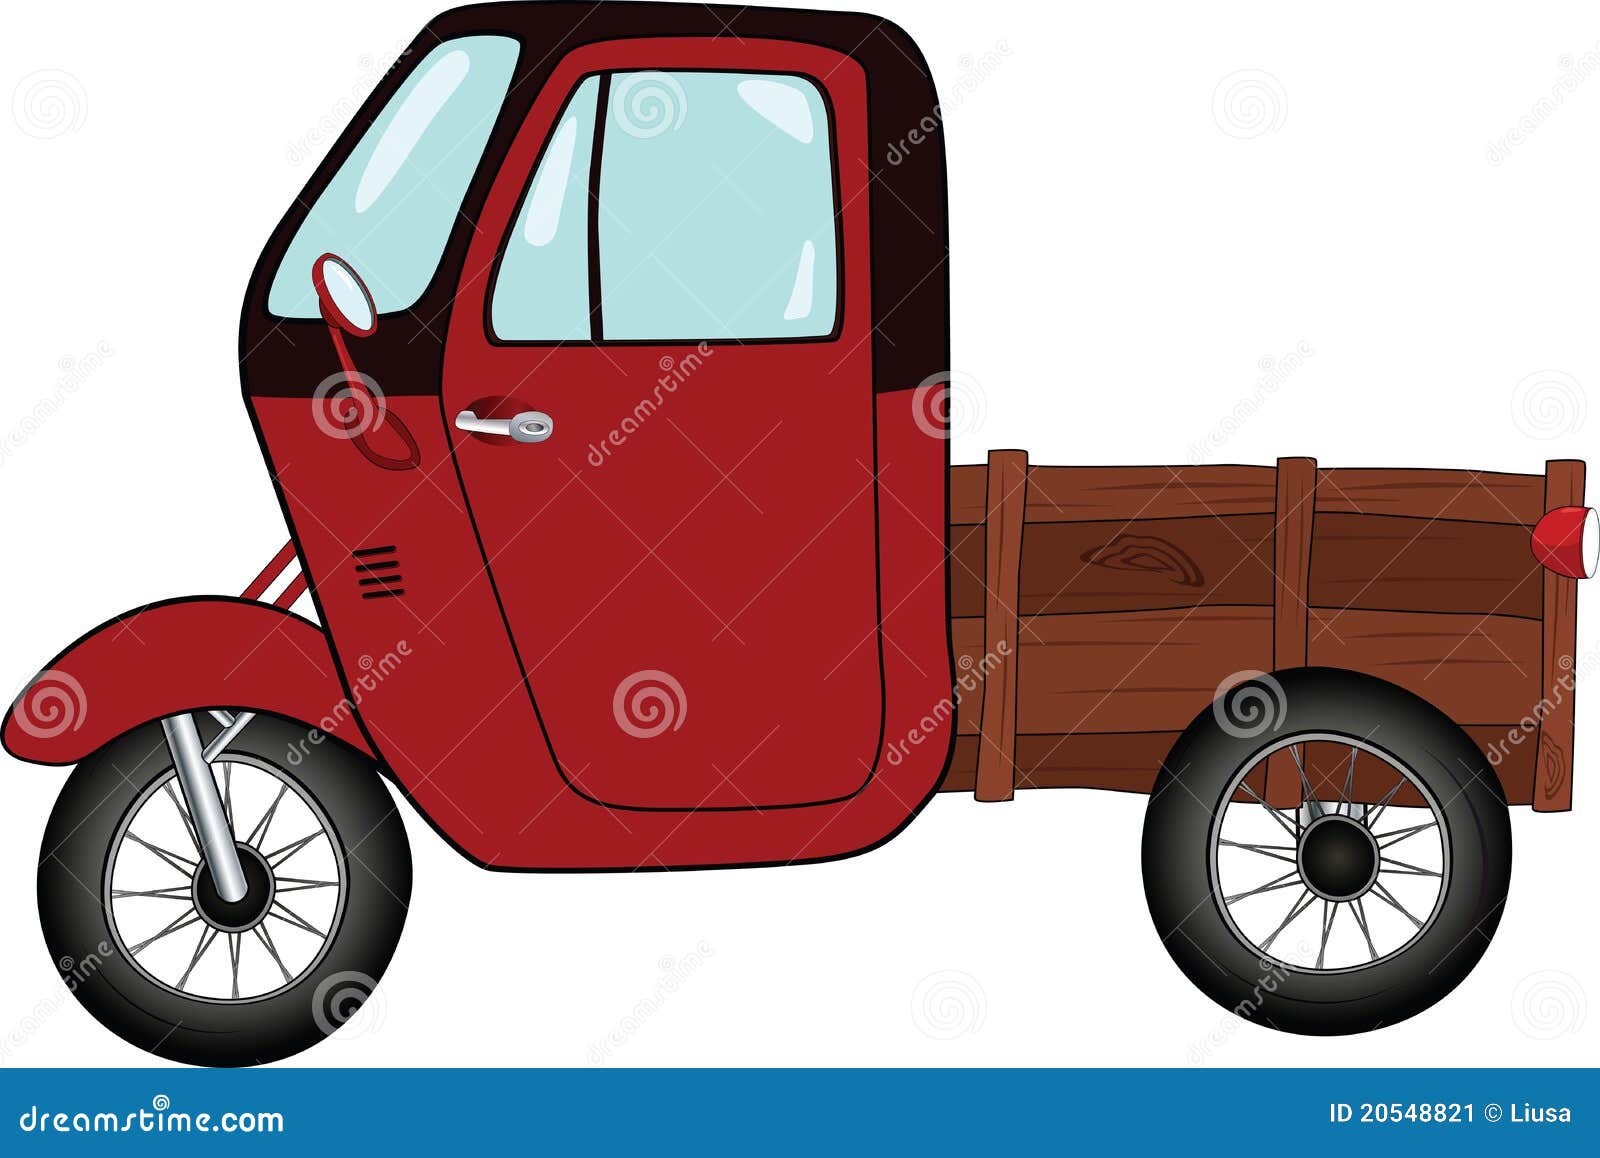 The old car. Cartoon stock vector. Illustration of drive - 20548821